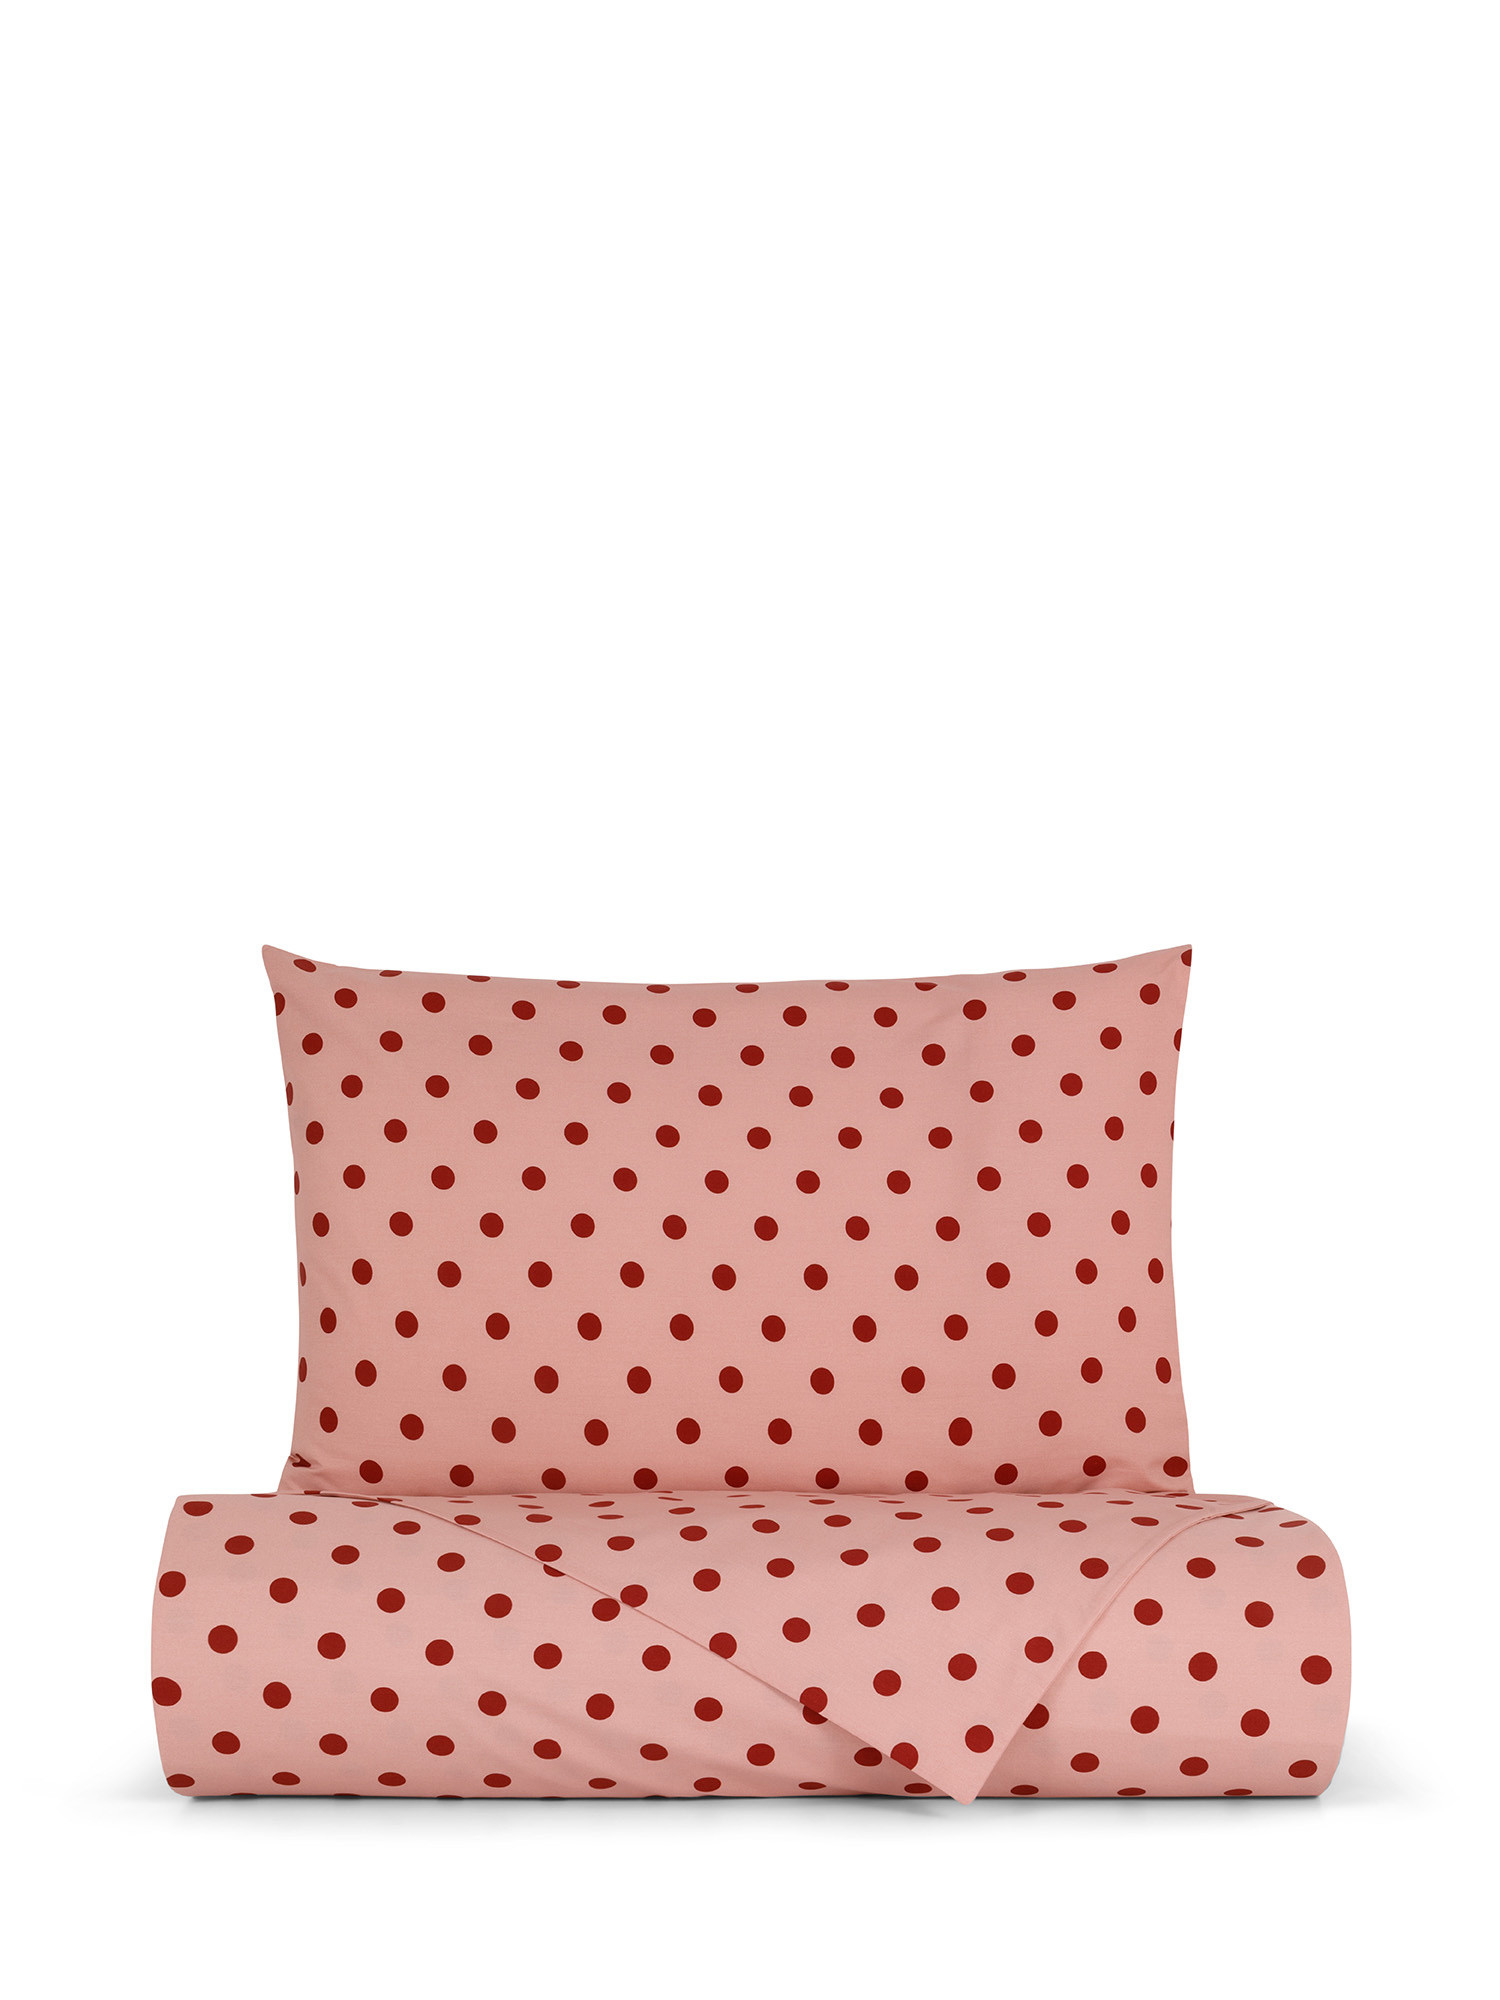 Cotton percale duvet cover with polka dot print, Multicolor, large image number 0